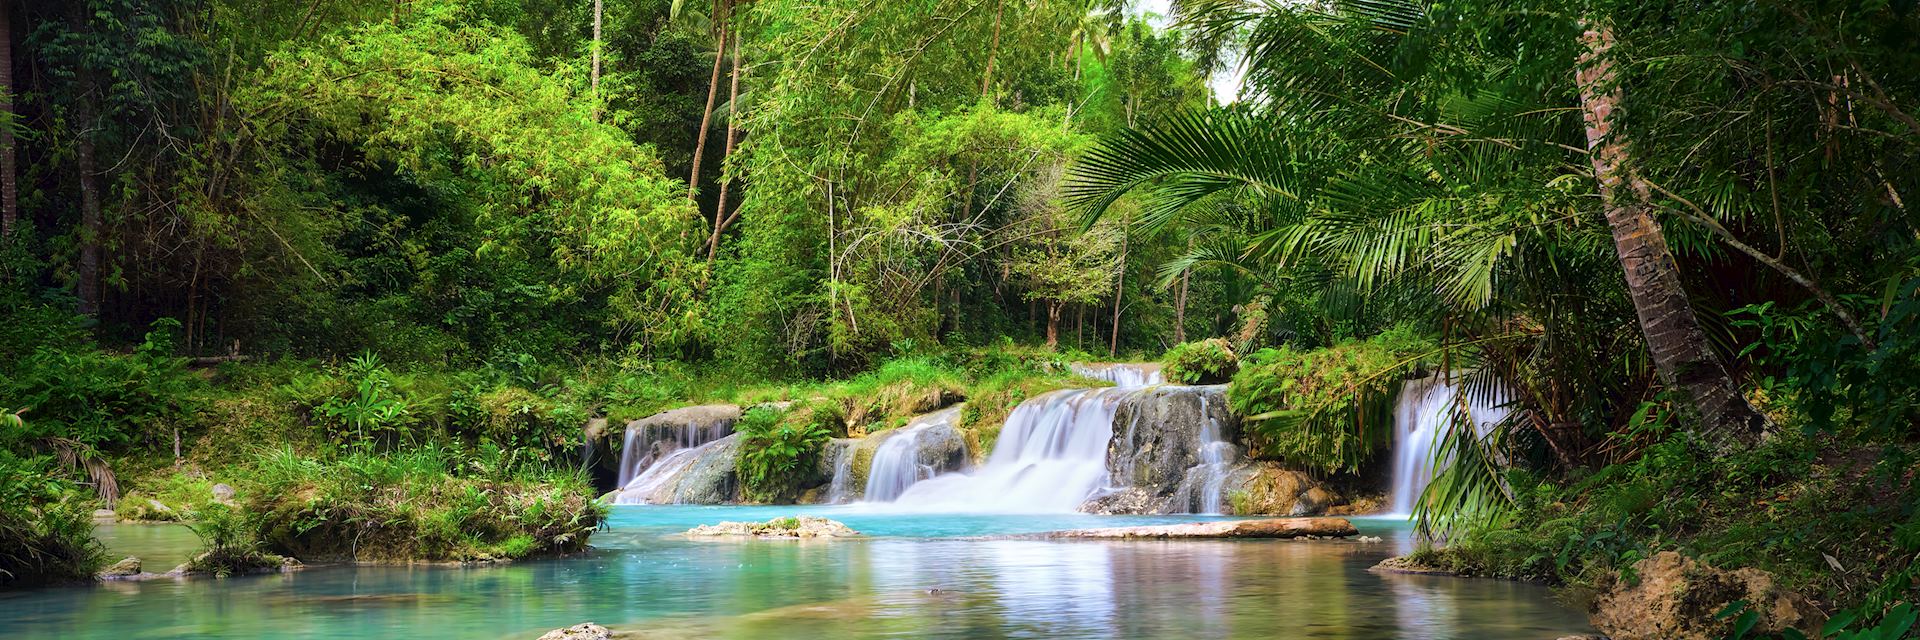 Waterfall in Siquijor